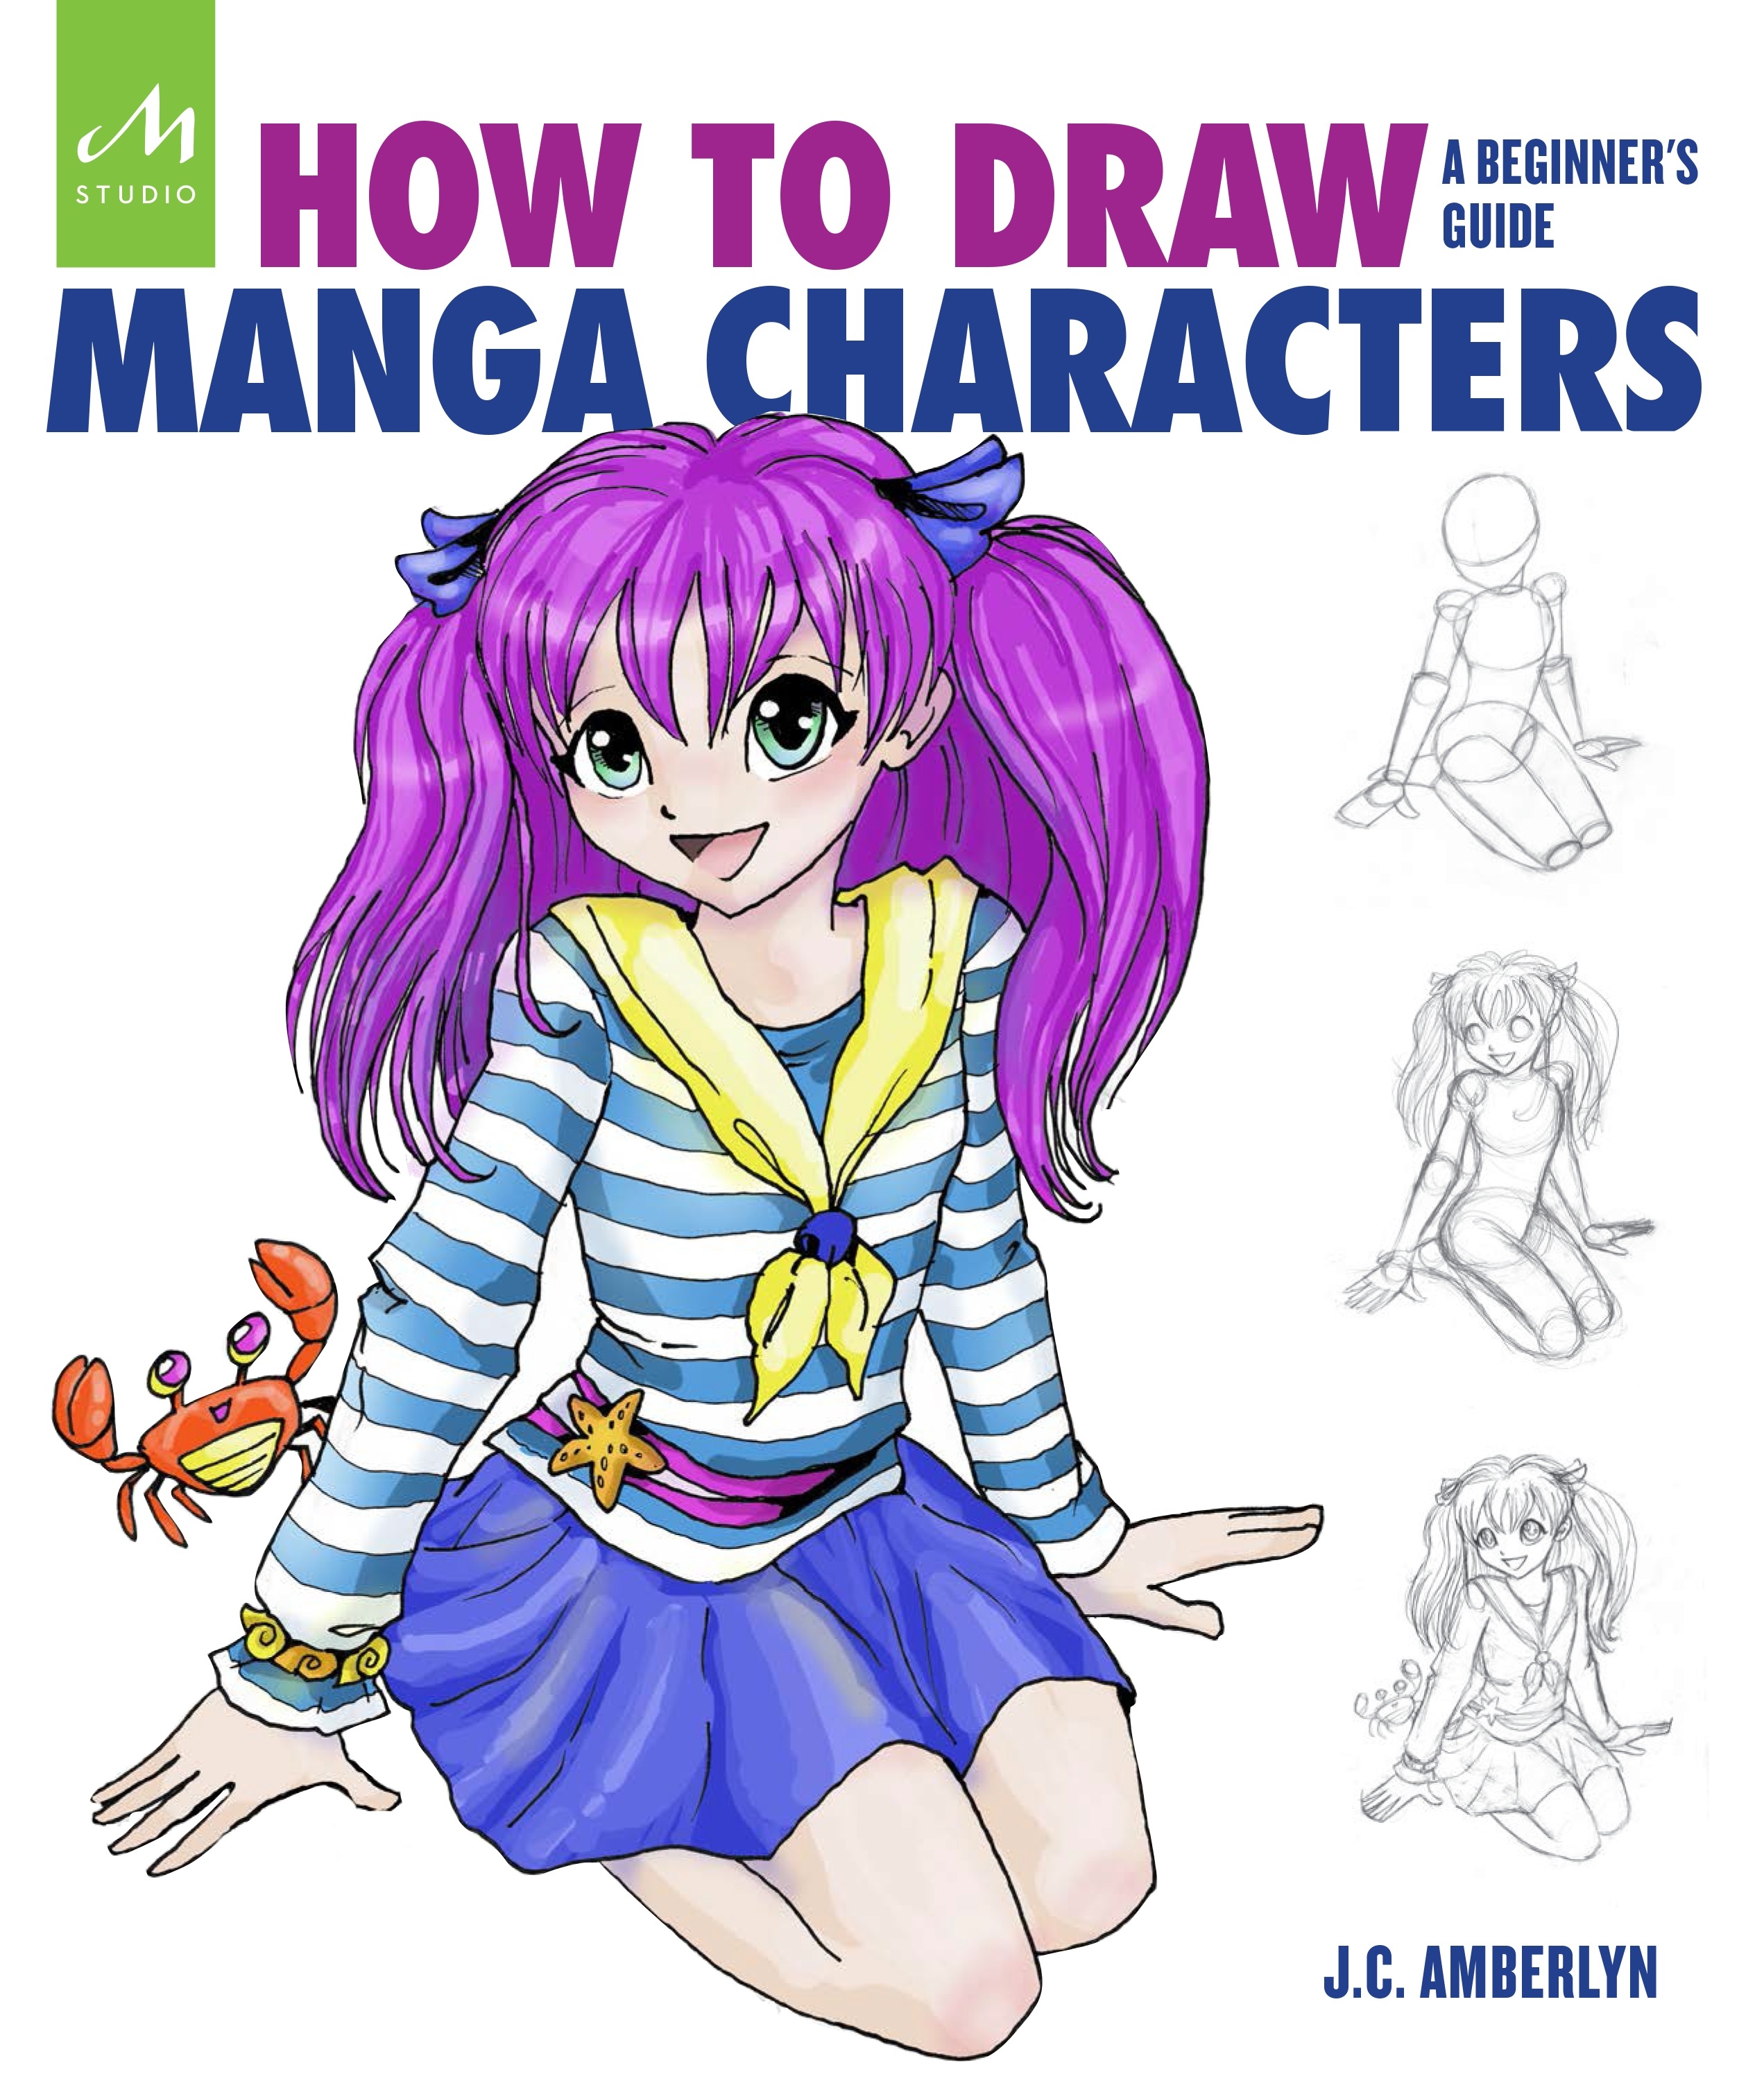 How To Draw Manga Characters by J.C. Amberlyn - Penguin ...